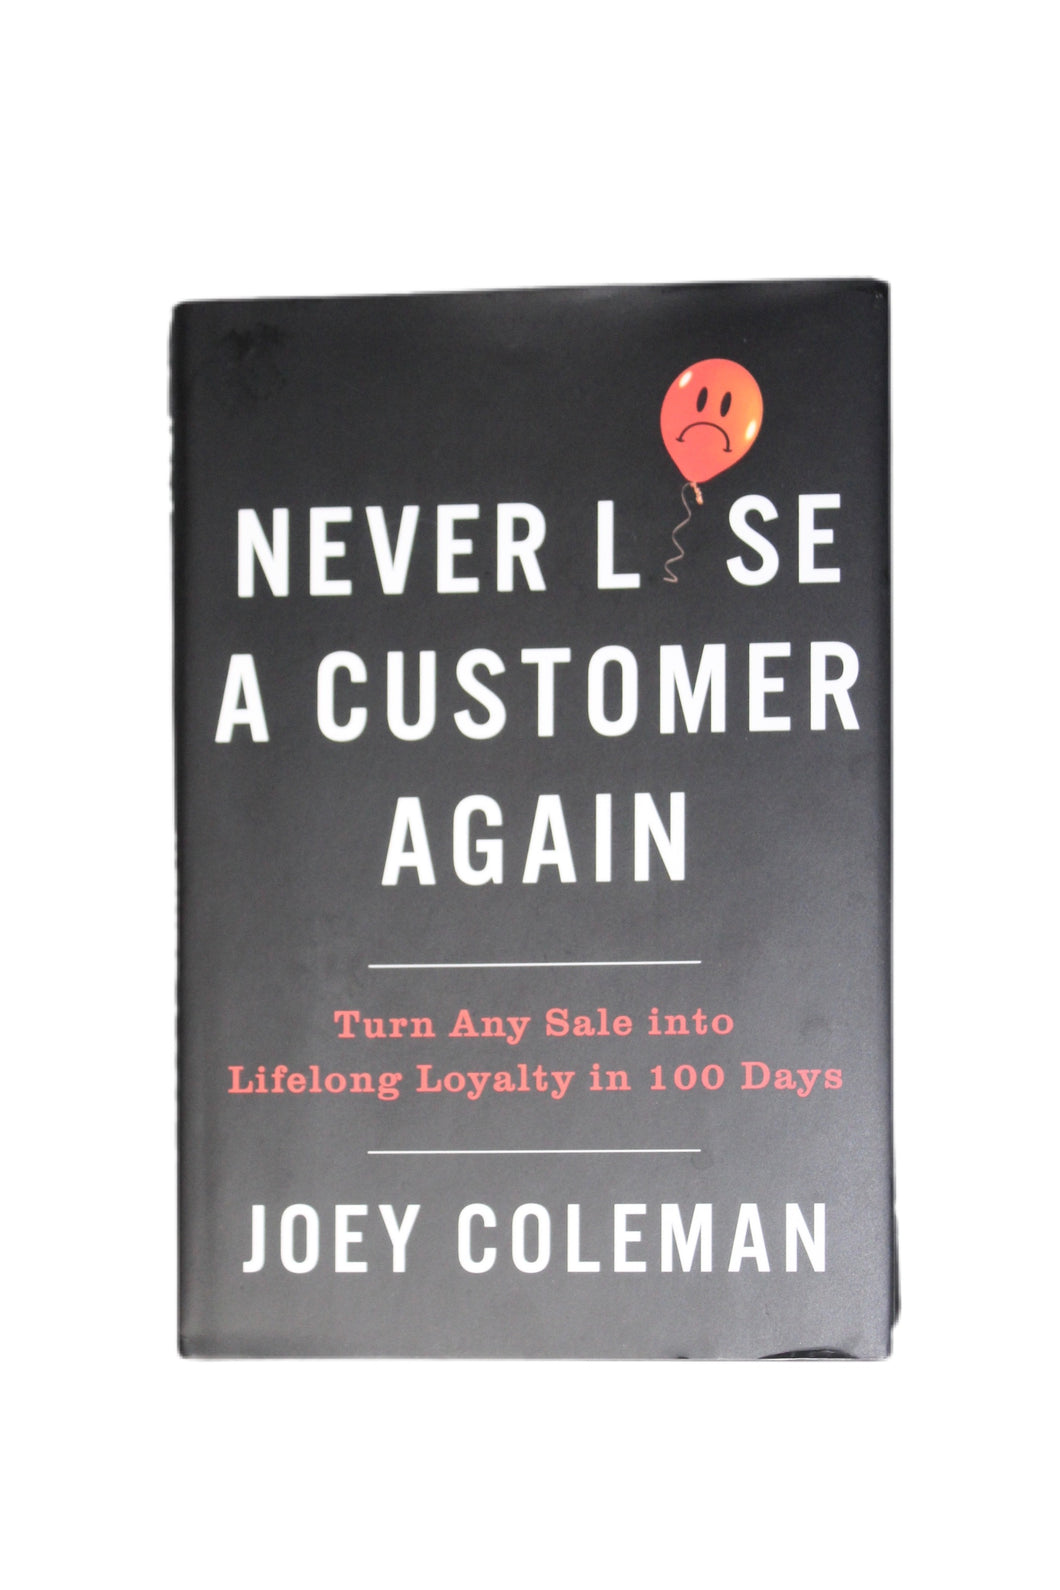 Never Lose a Customer Again: Turn Any Sale into Lifelong Loyalty in 100 Days Hardcover Book